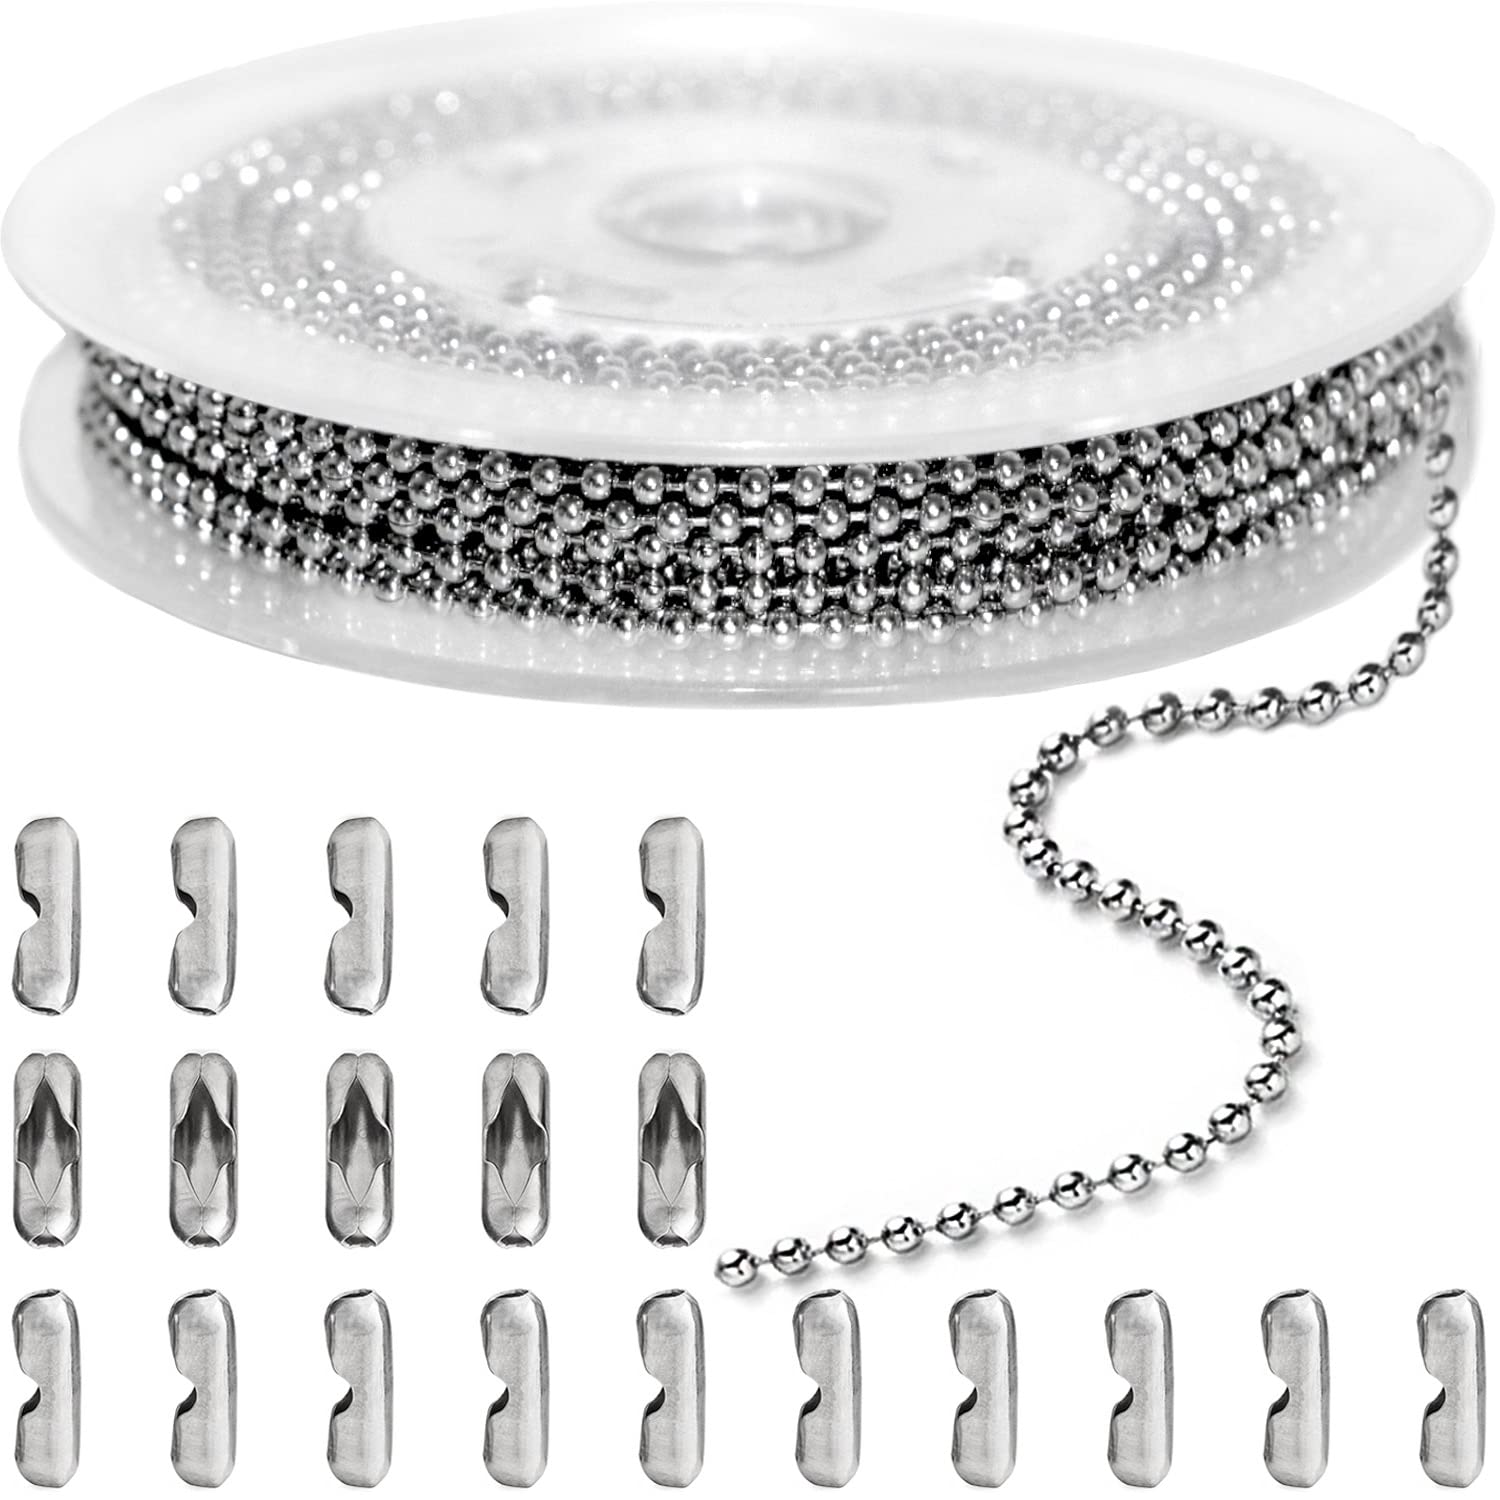 Jishi 33ft Ball Chain 2.4mm Silver Stainless Steel Bead Link Chain